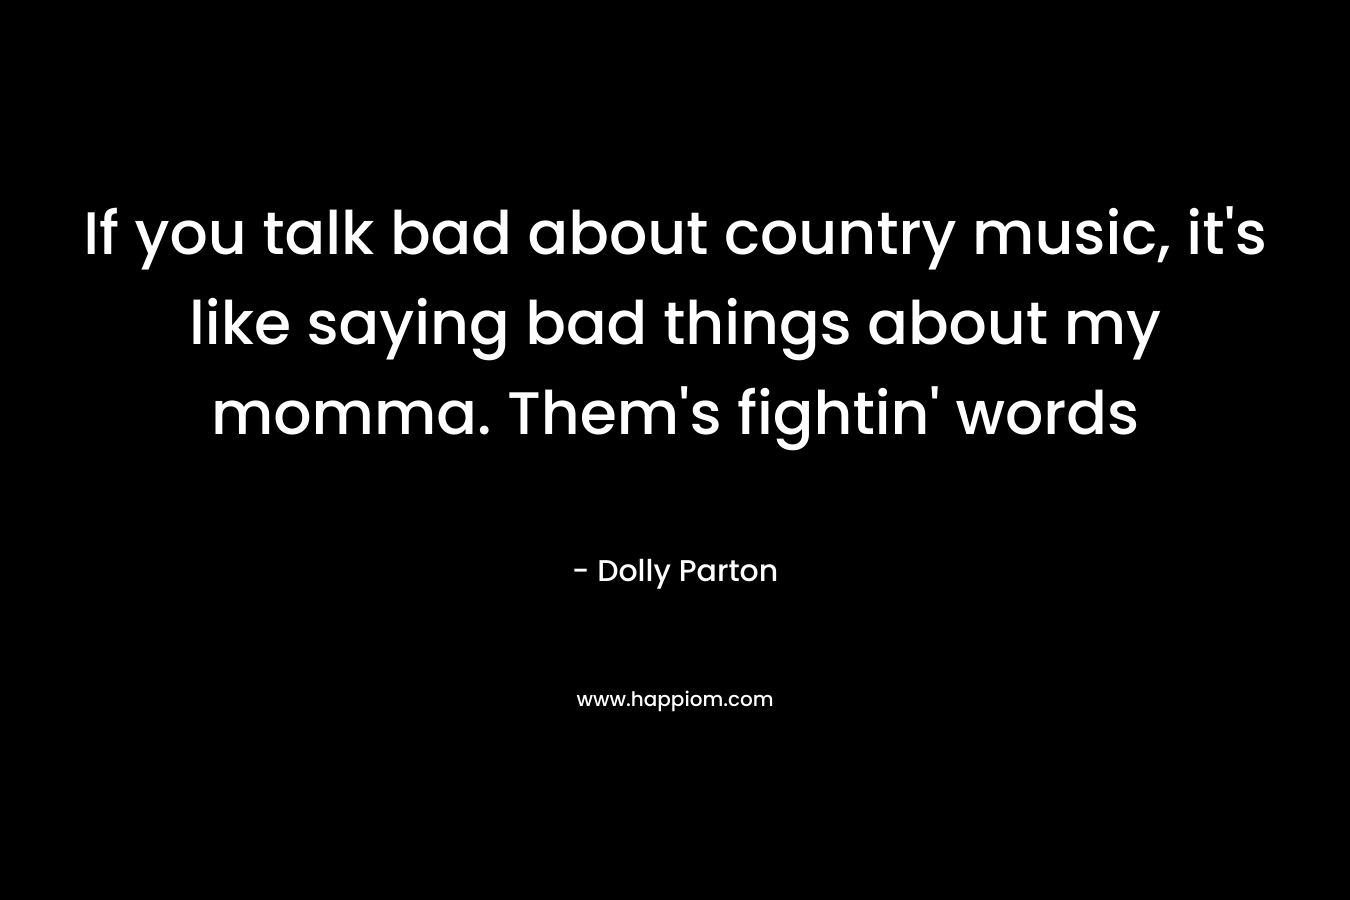 If you talk bad about country music, it's like saying bad things about my momma. Them's fightin' words